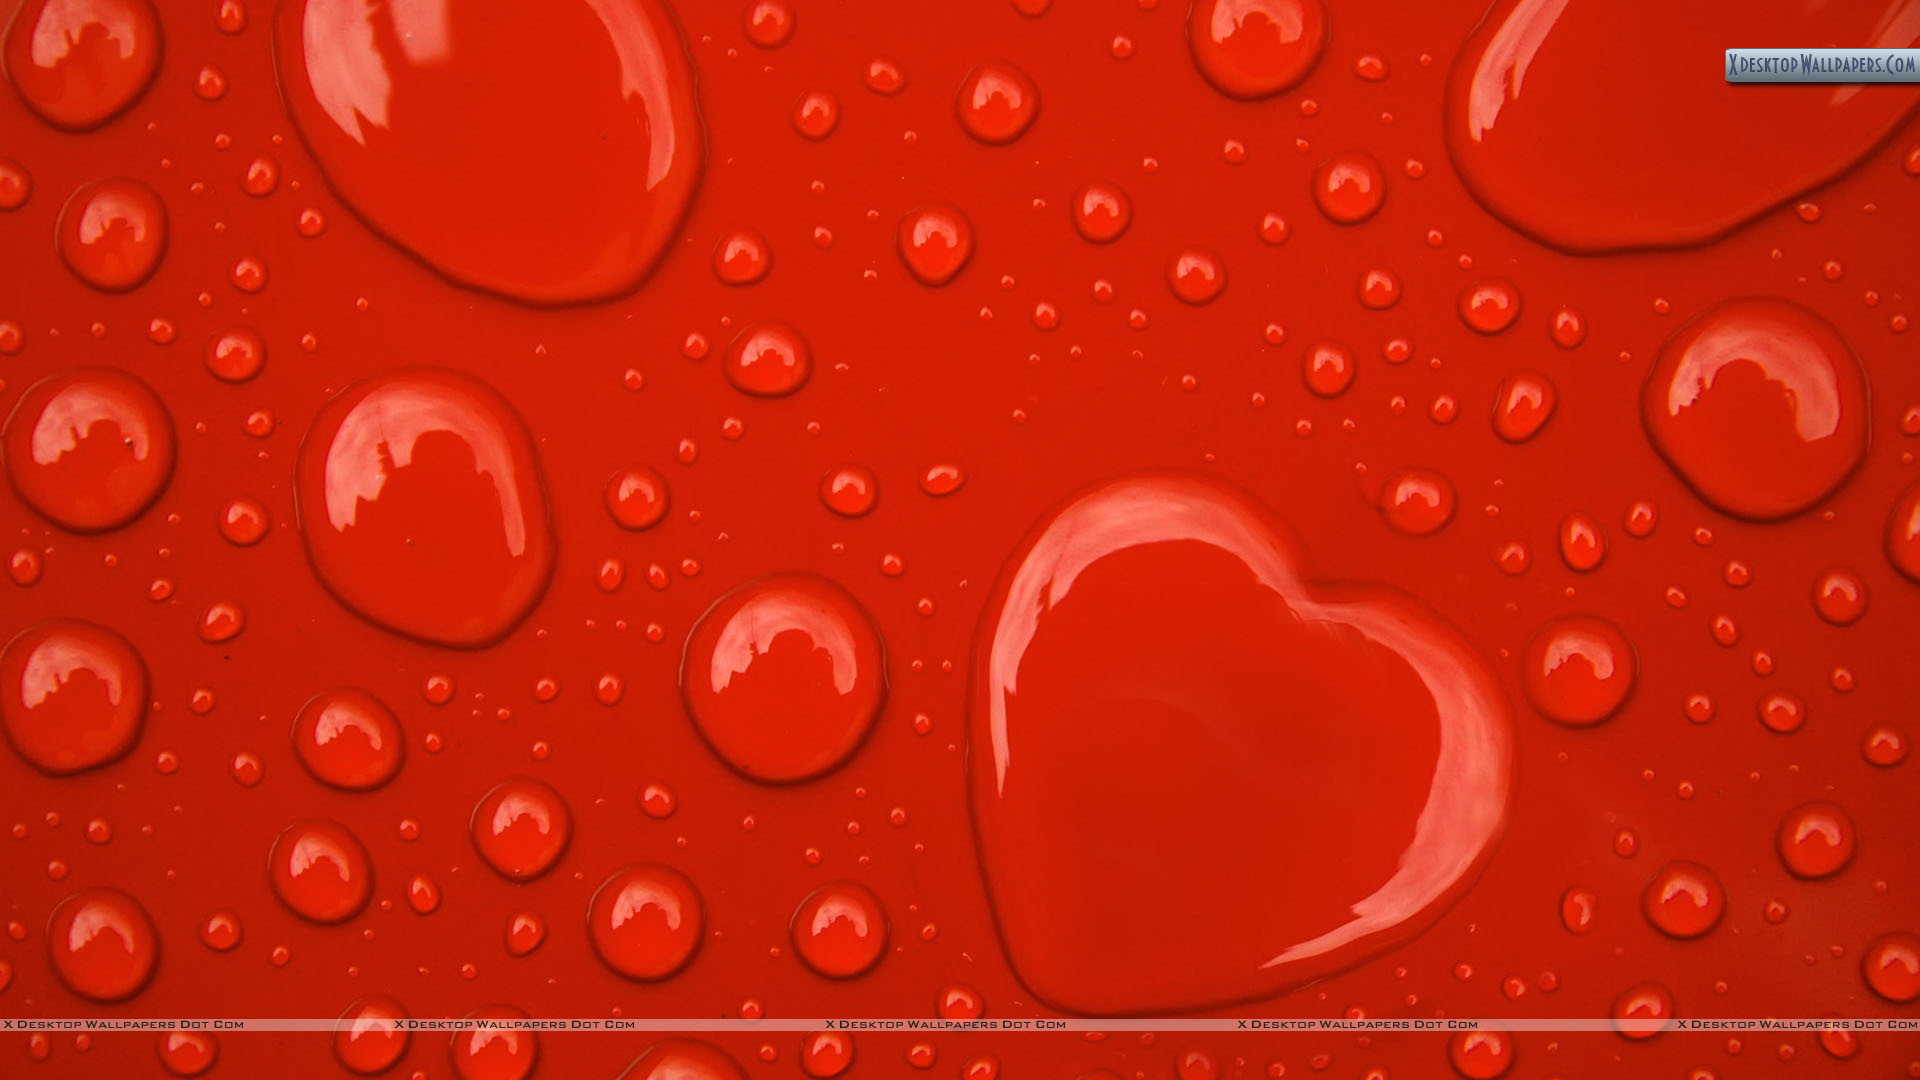 1920x1080 Water Drop Hearts On Red Background Wallpaper Black Wallpaper Red Background  Blackwallpaper Water Drop Hearts Black